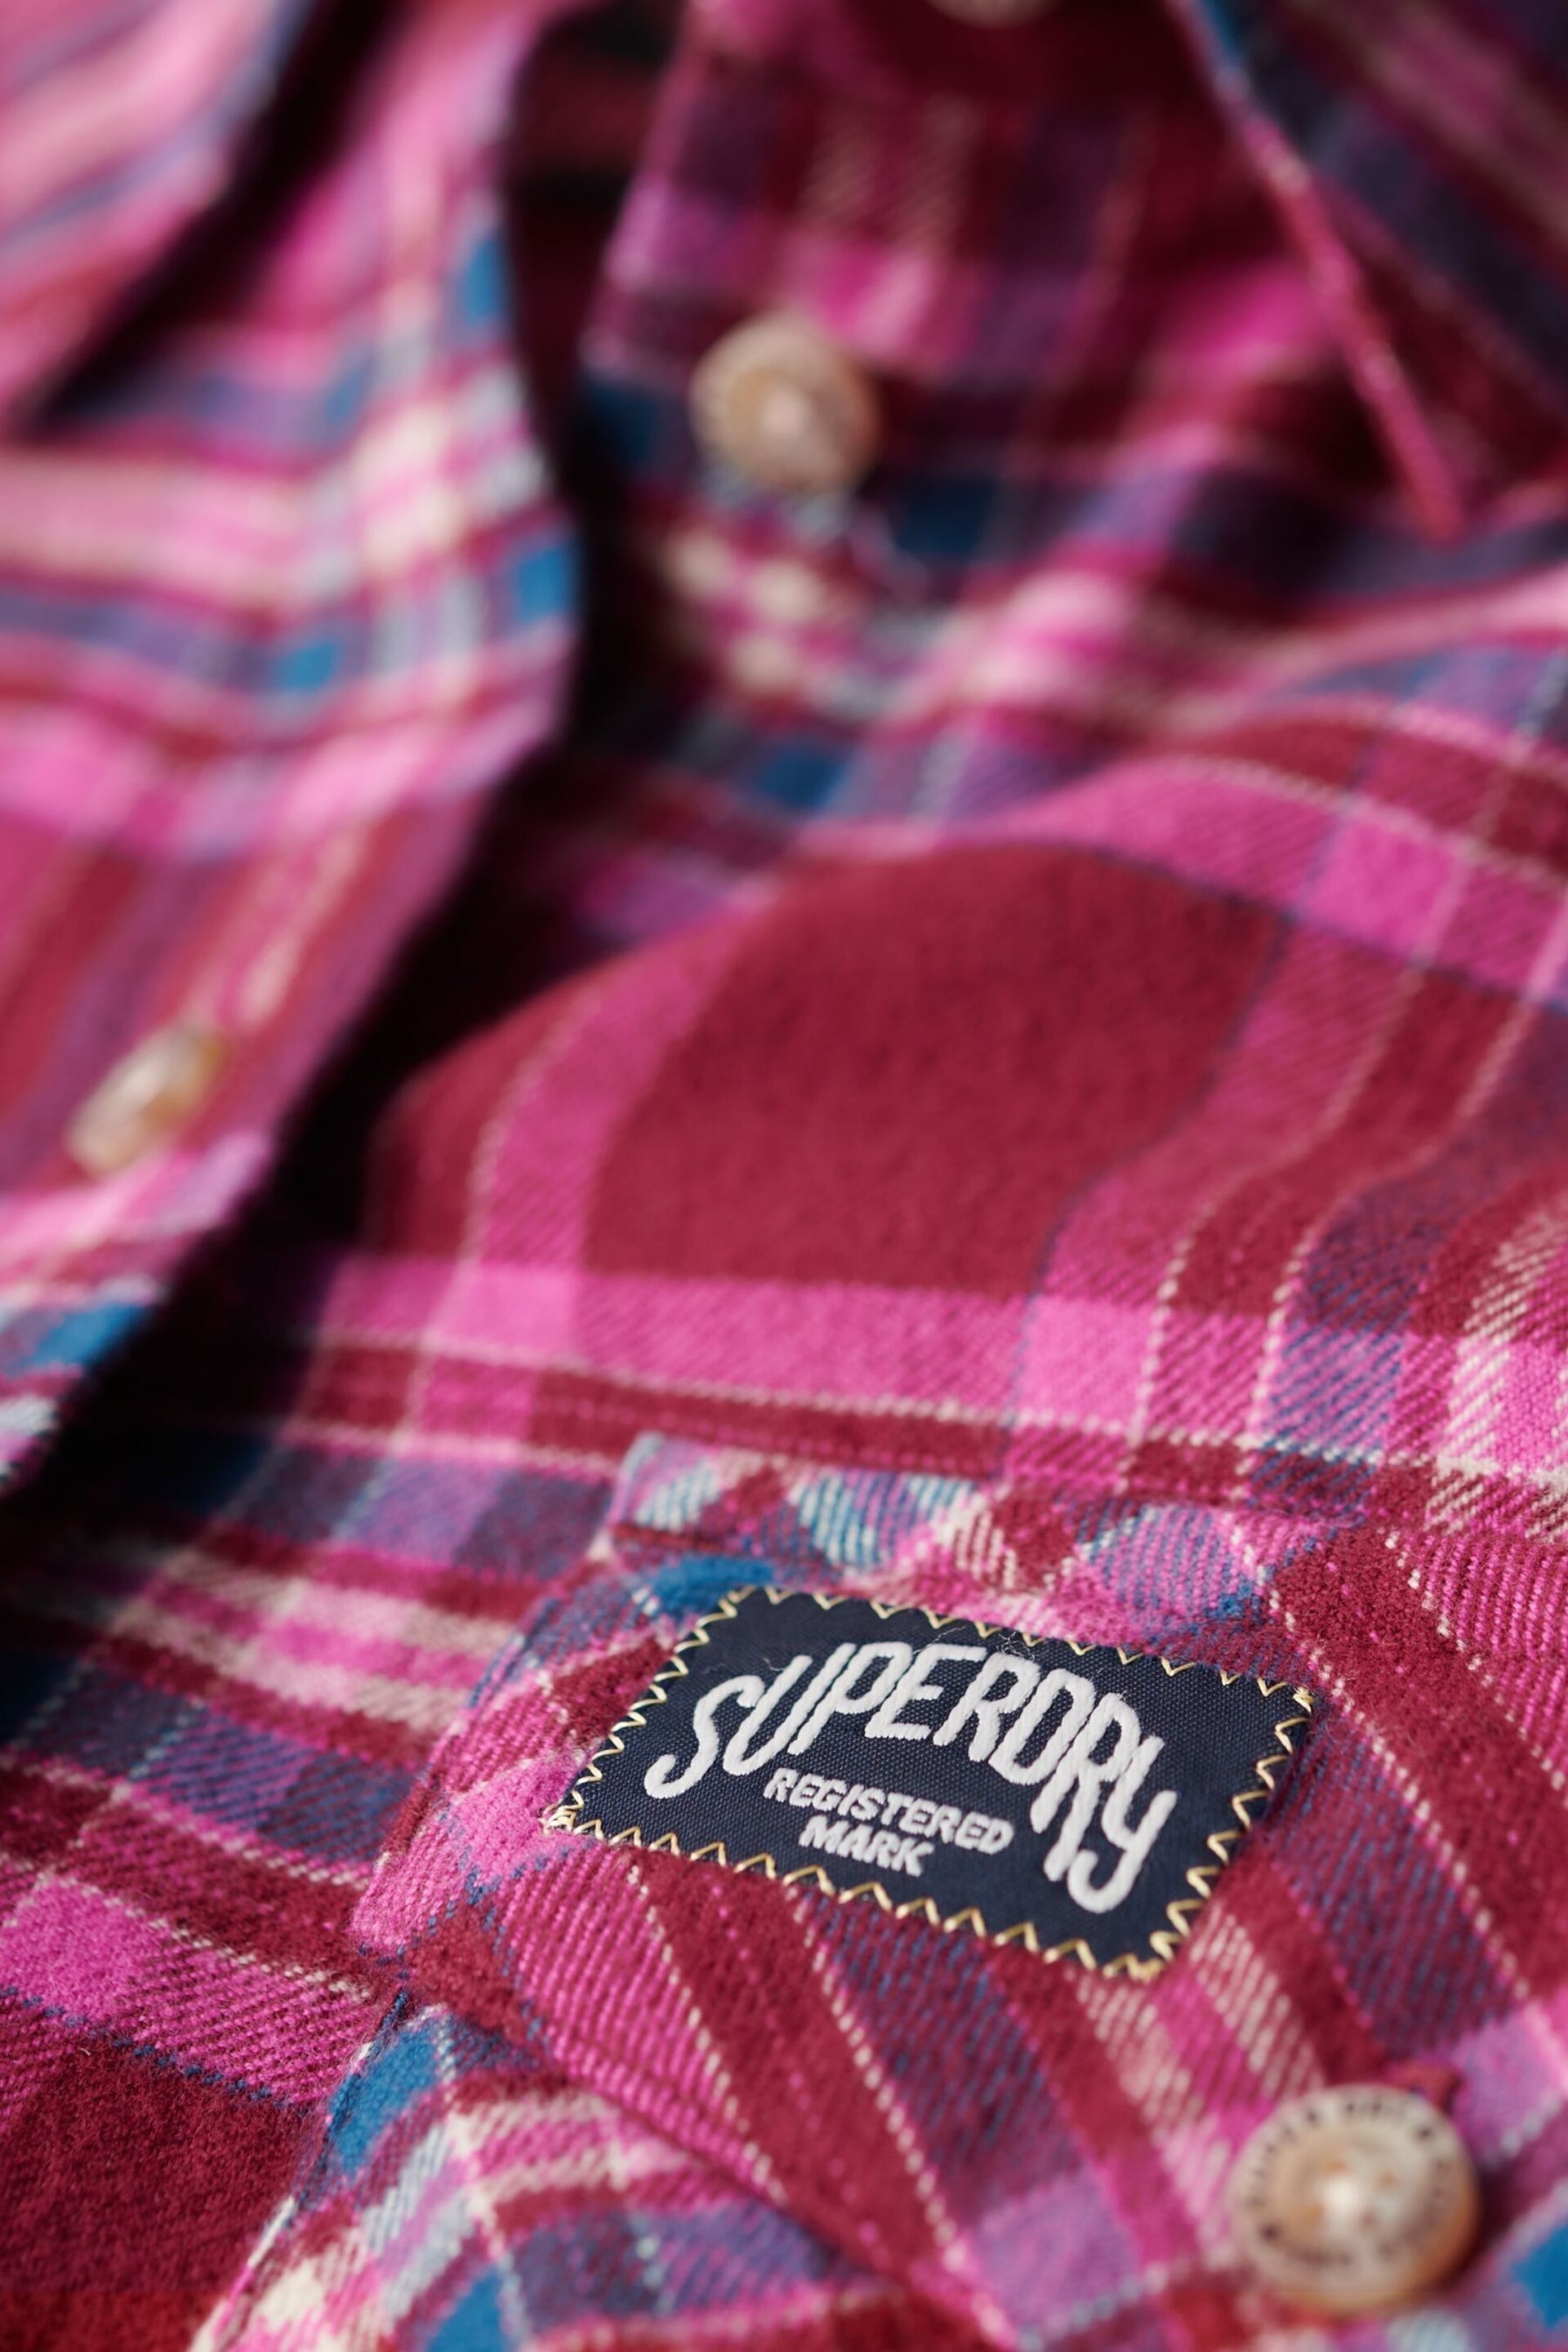 Superdry Red Lumberjack Check Flannel Shirt - Image 7 of 7